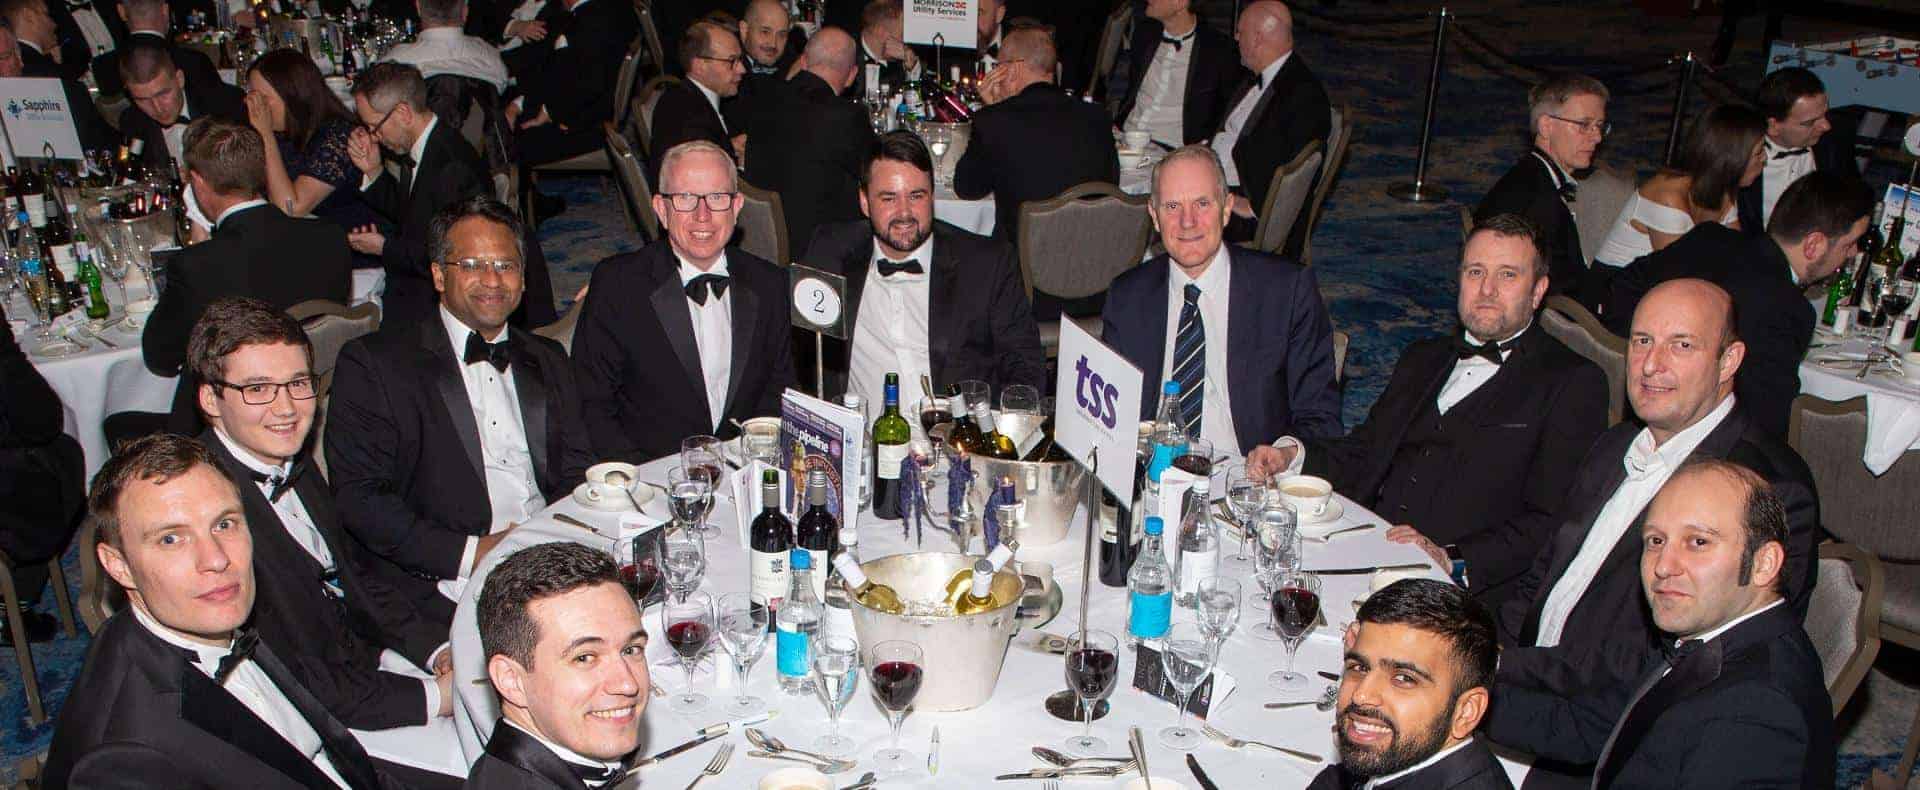 TSS Team at the Pipeline Industries Guild dinner 2018